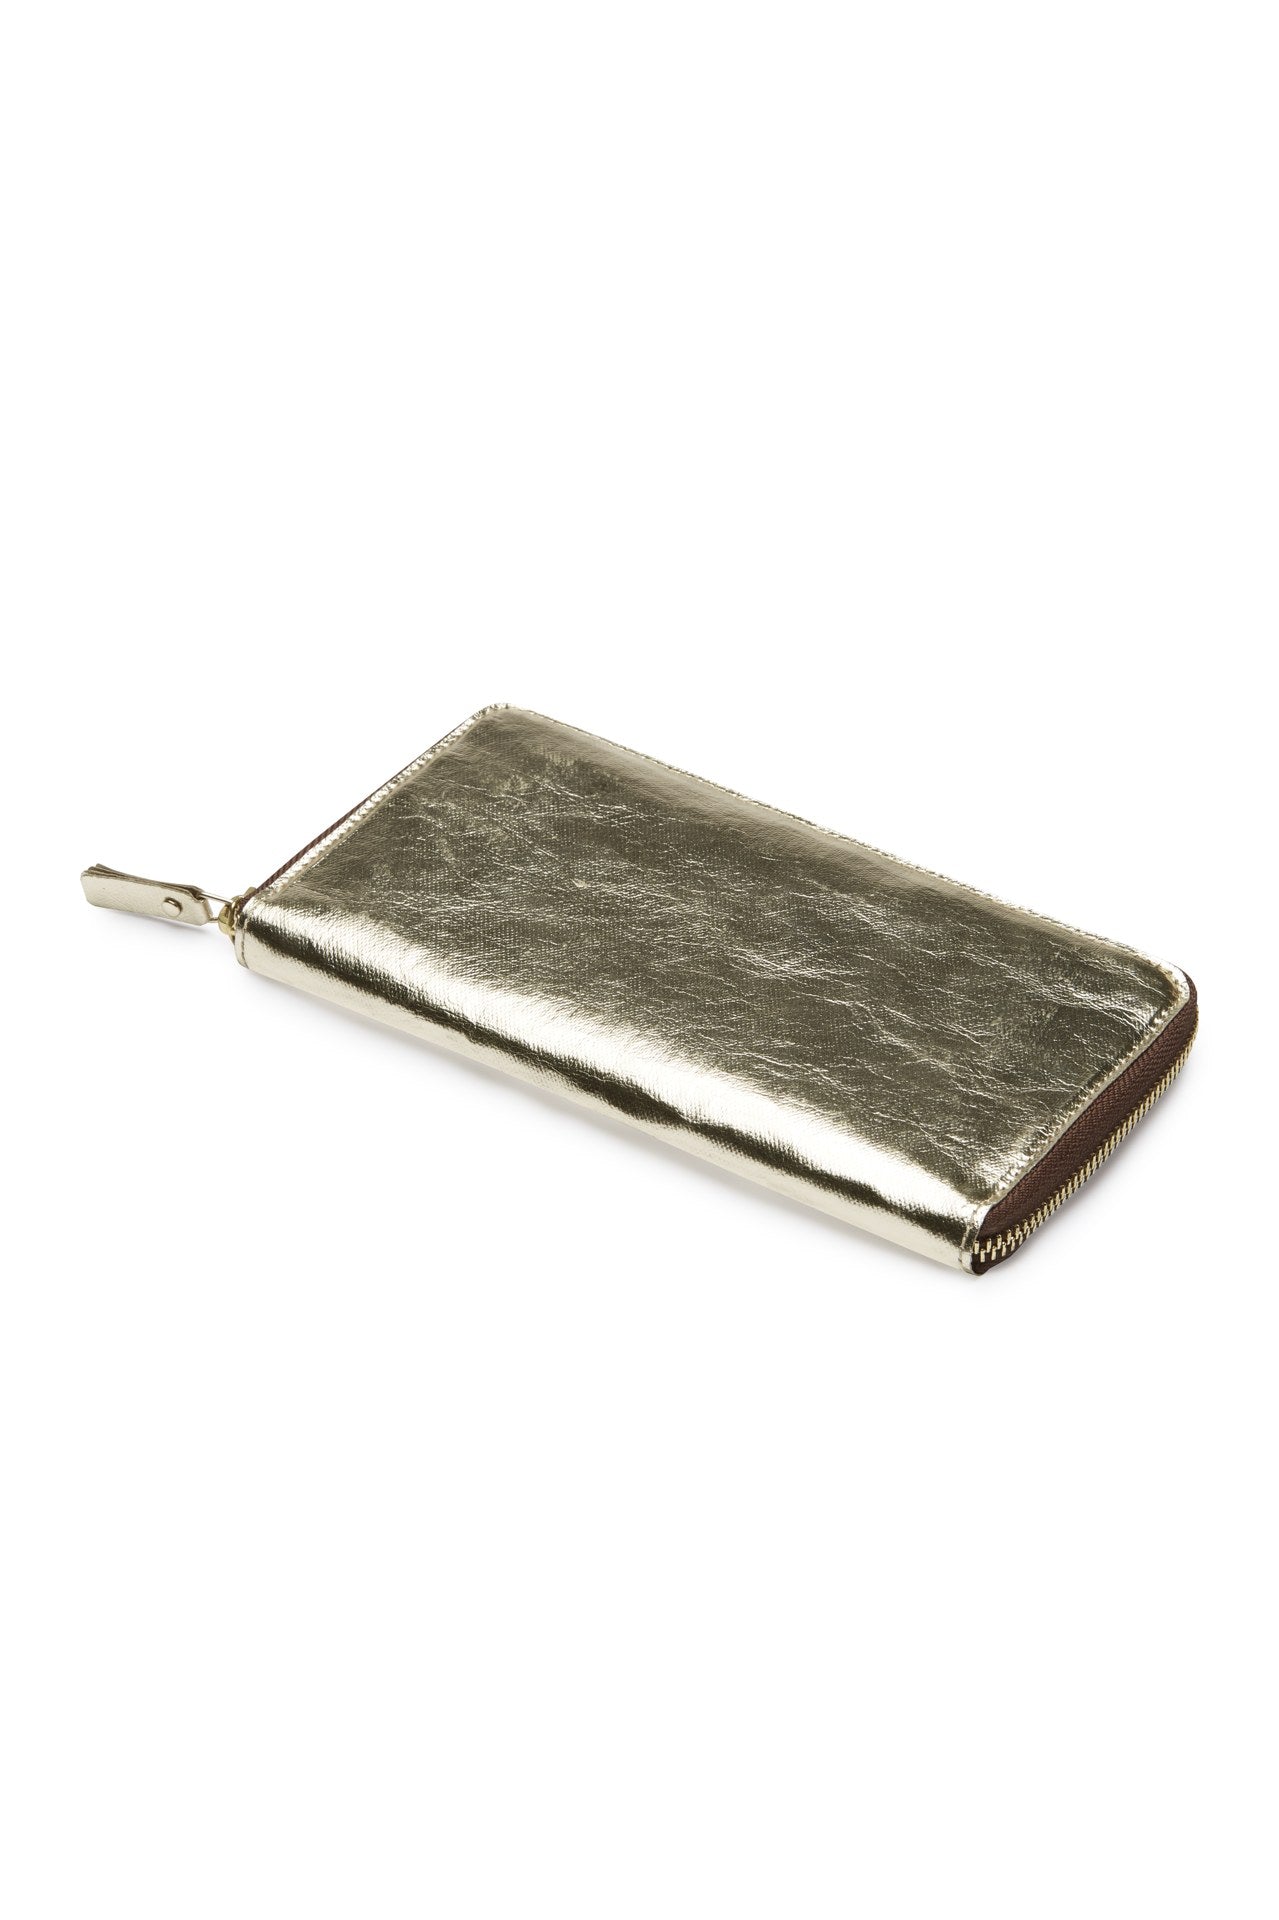 The outside of a large zippered washable paper wallet is shown. The image also shows a silver zip and washable paper zip pull. The wallet shown is metallic platinum.